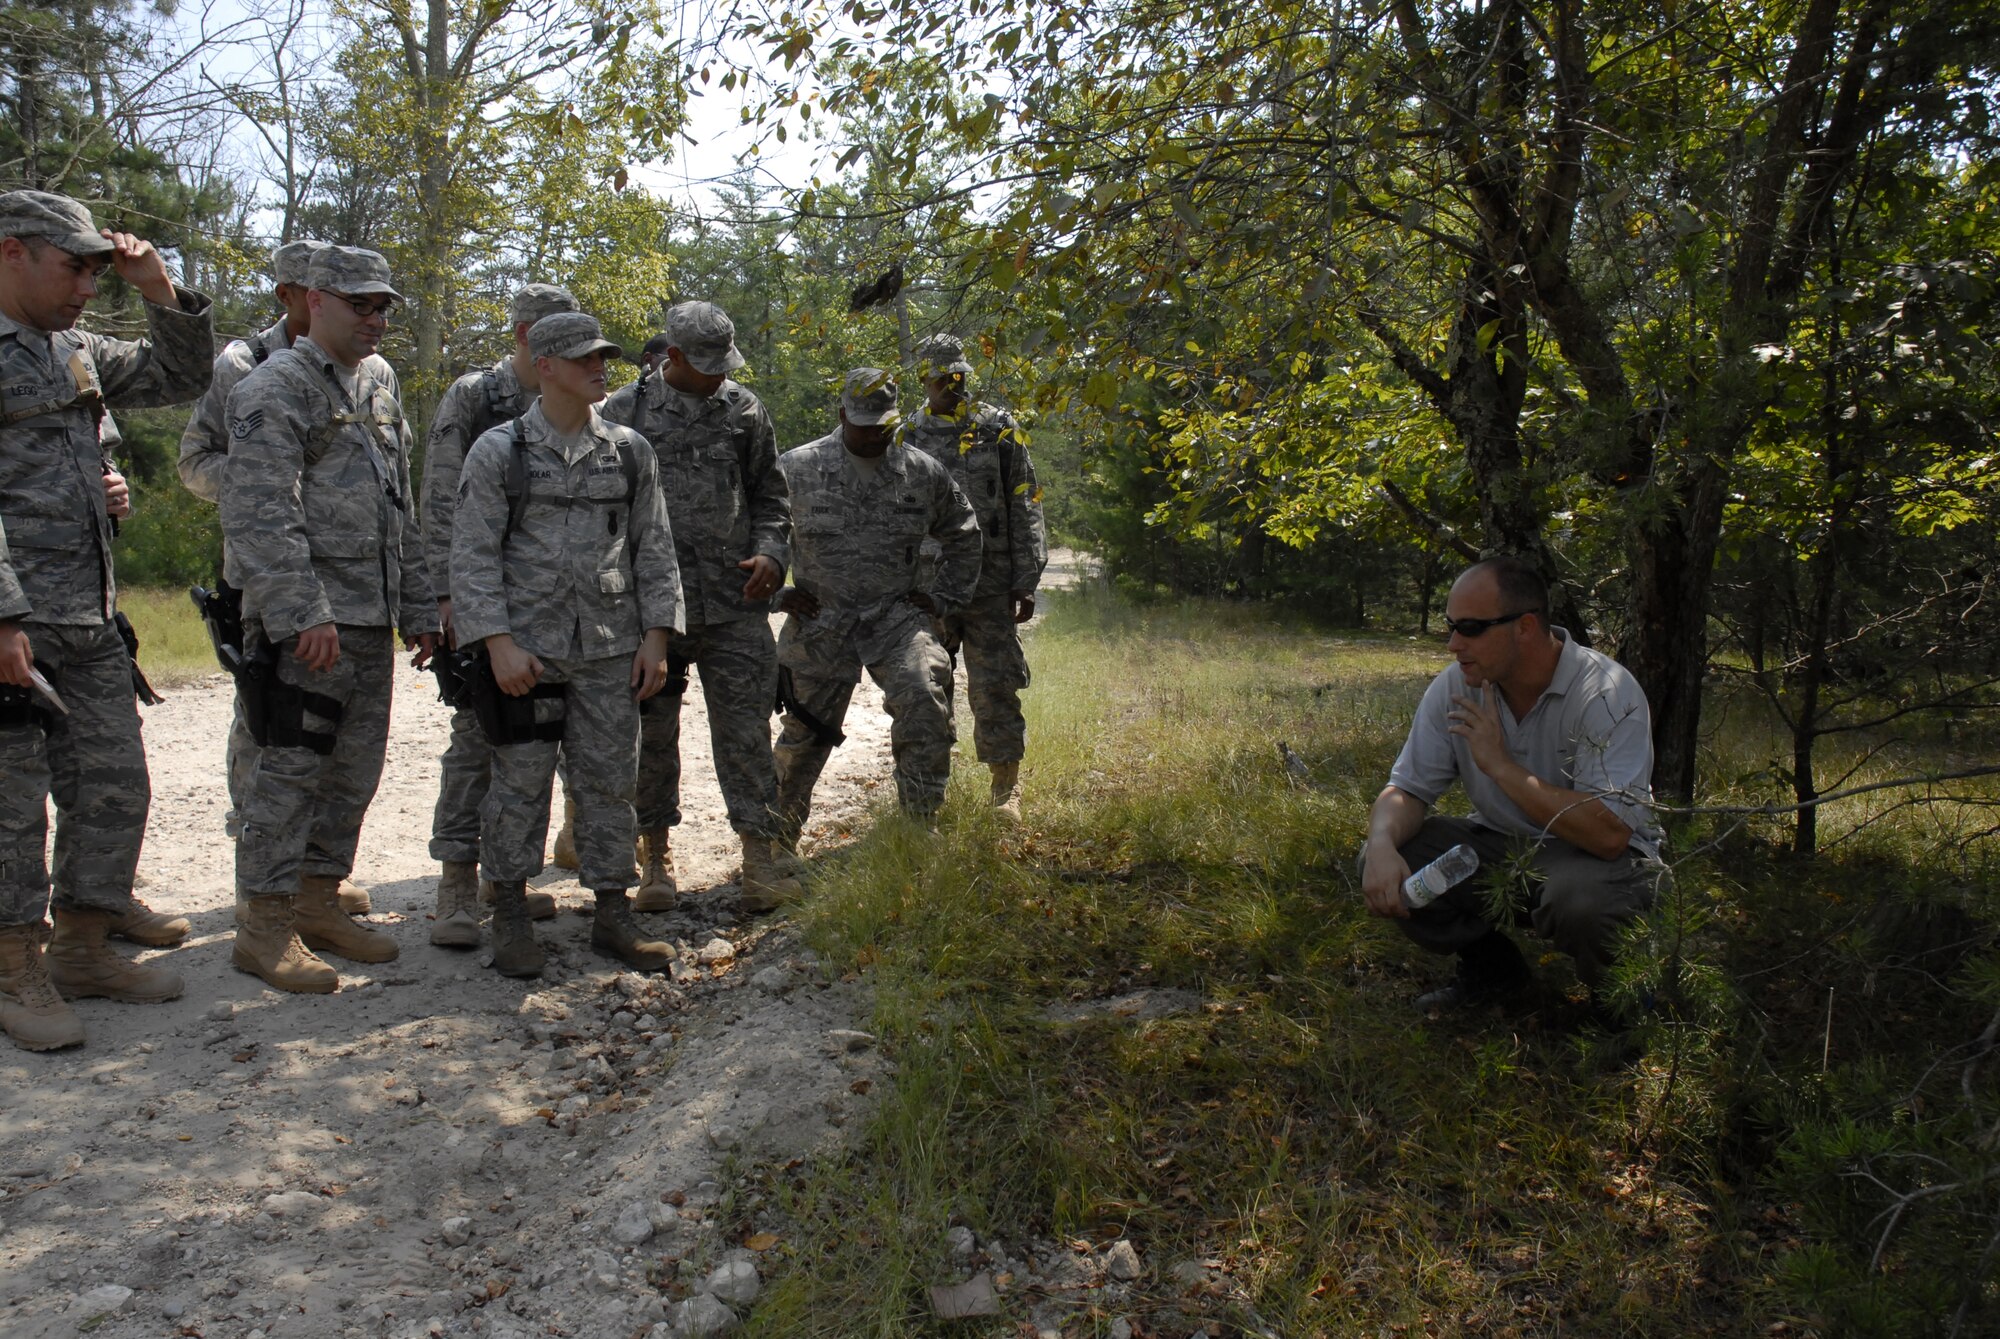 An EOD instructor, Mr. David Leventhal, shows security forces students what signs to look for to detect an IED placed on their convoy route during a training exercise on a Fort Dix range, August 26, 2009, conducted by the 421st Combat Training Squadron hosted by the U.S. Air Force Expeditionary Center, Joint Base McGuire-Dix-Lakehurst, N.J. (U.S. Air Force Photo/Tech. Sgt. Paul R. Evans)